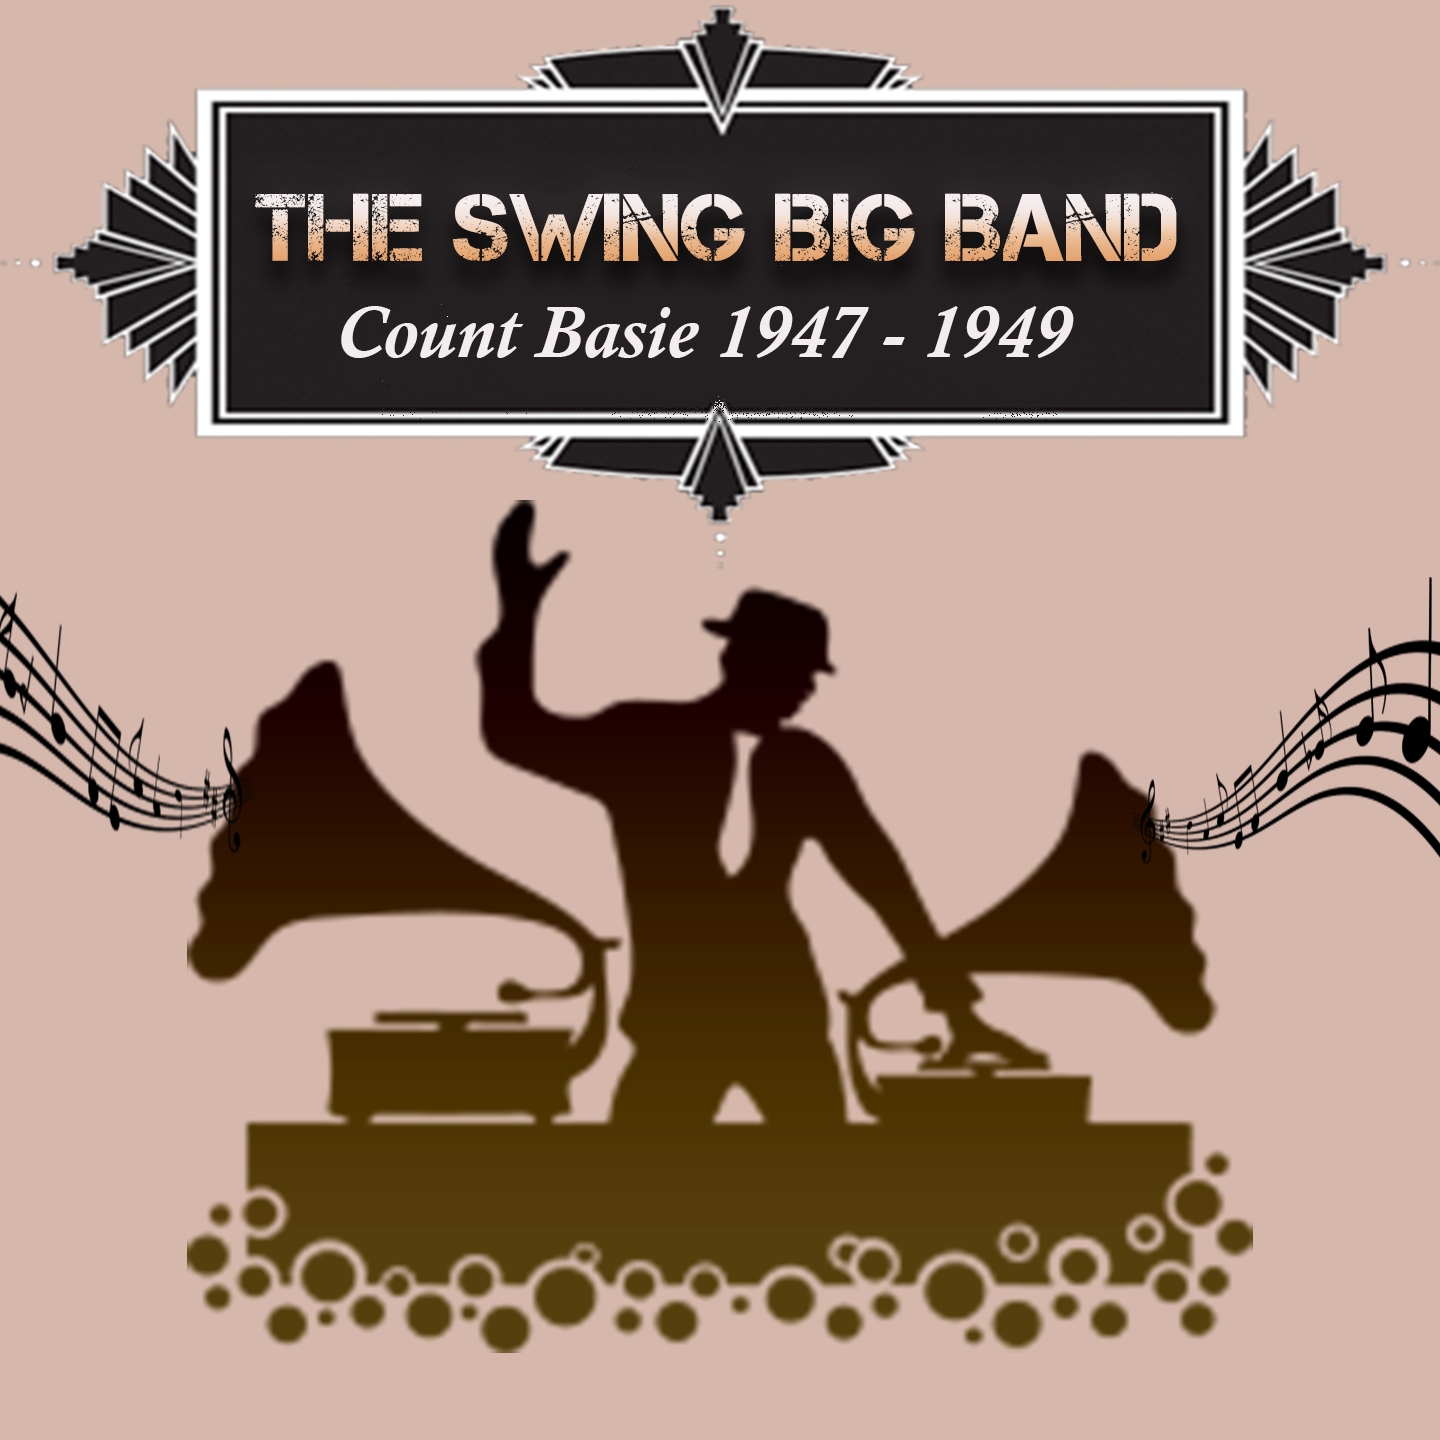 The Swing Big Band, Count Basie 1947 - 1949